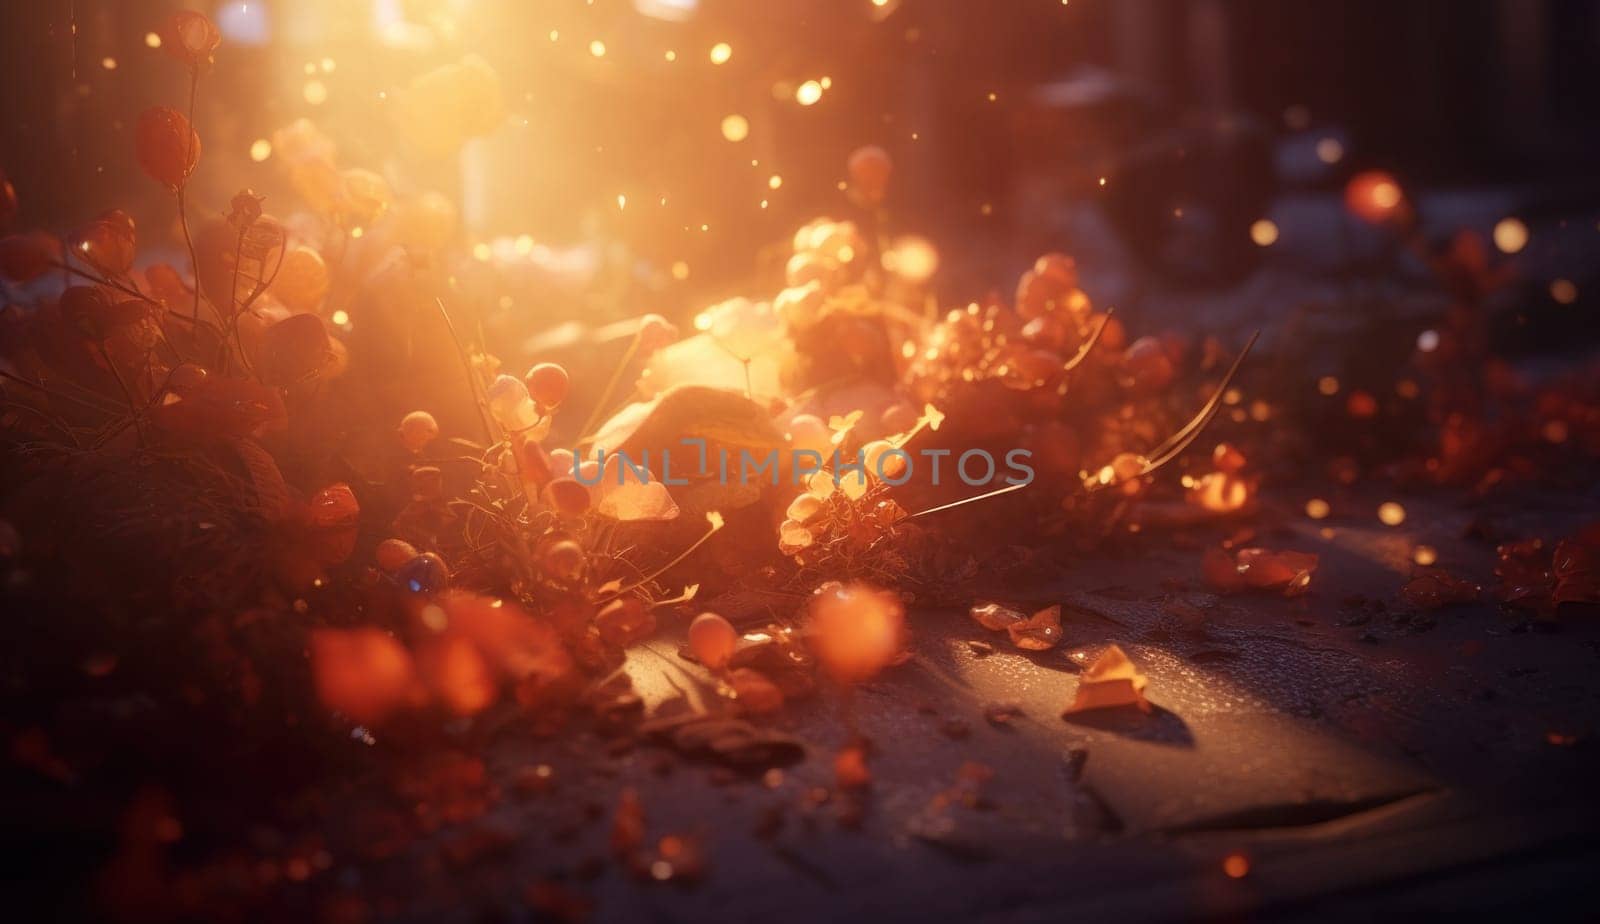 The sun shines through the leaves on the ground, AI by starush